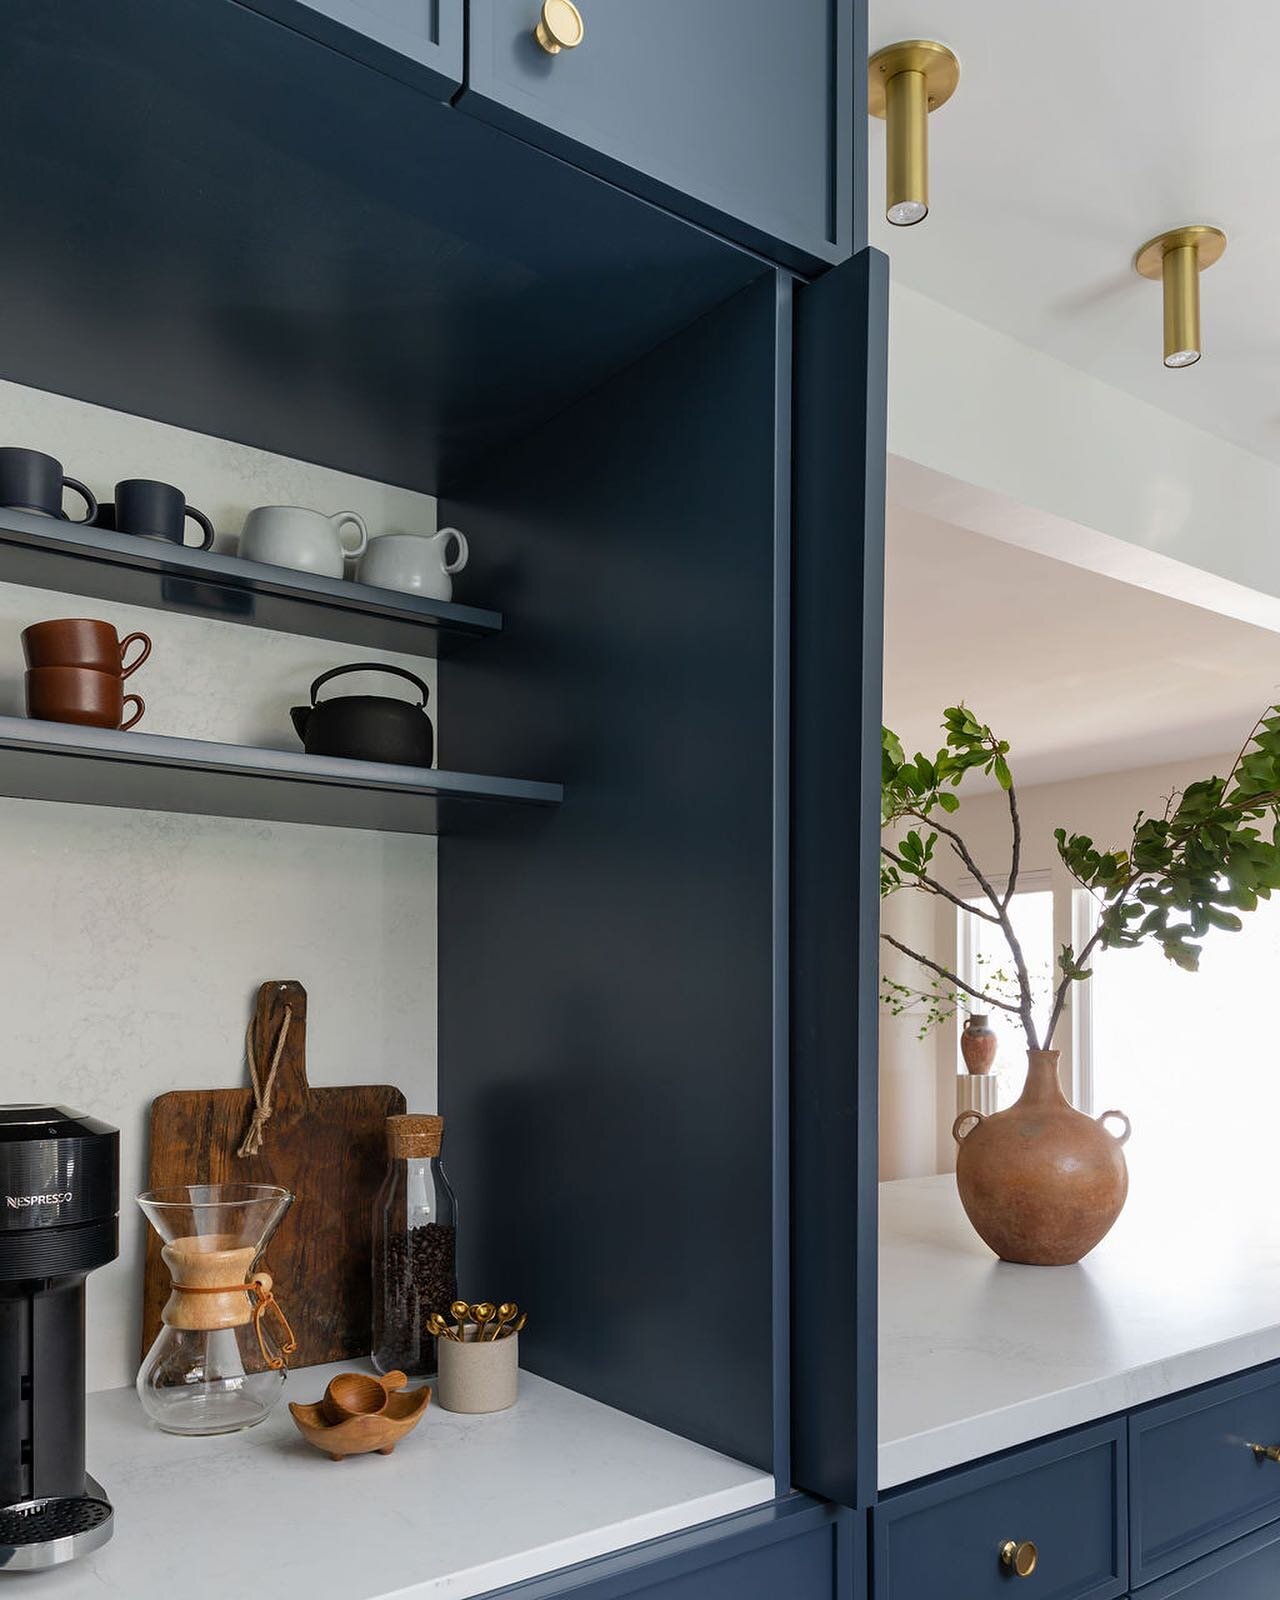 What design elements are an absolute must in your kitchen space? For coffee connoisseurs, a station dedicated to preparing the perfect cup was a top priority. We positioned this beloved spot behind recessed doors to keep things streamlined and unclut